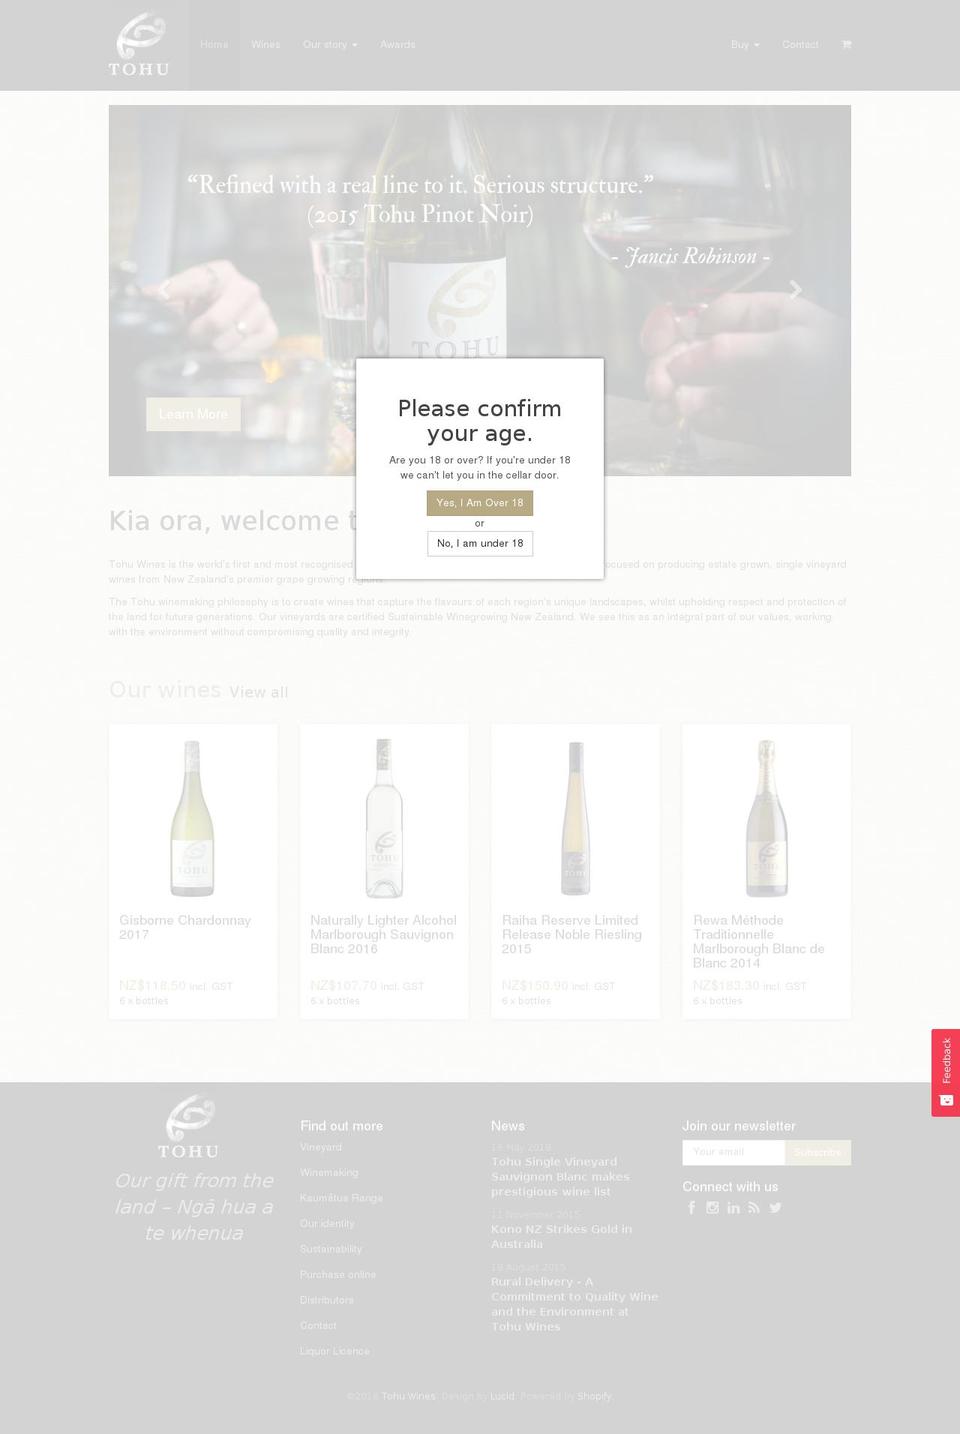 Bootstrapify - Mailchimp Form Changes Shopify theme site example tohuwines.co.nz